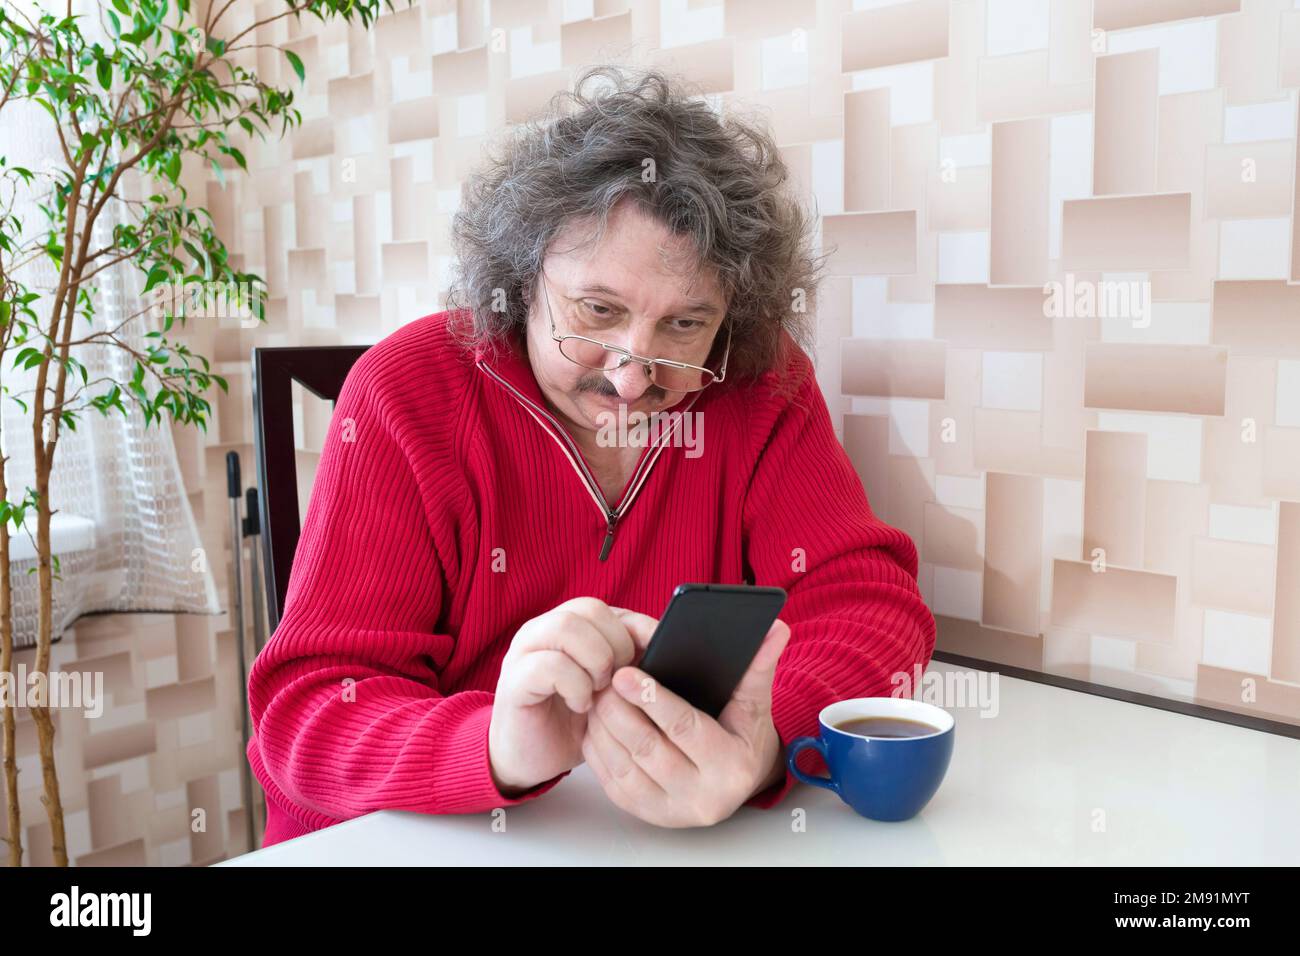 An elderly man in a red sweater and glasses with a phone in His Hands is sitting at the table. A pensioner, ageing Stock Photo